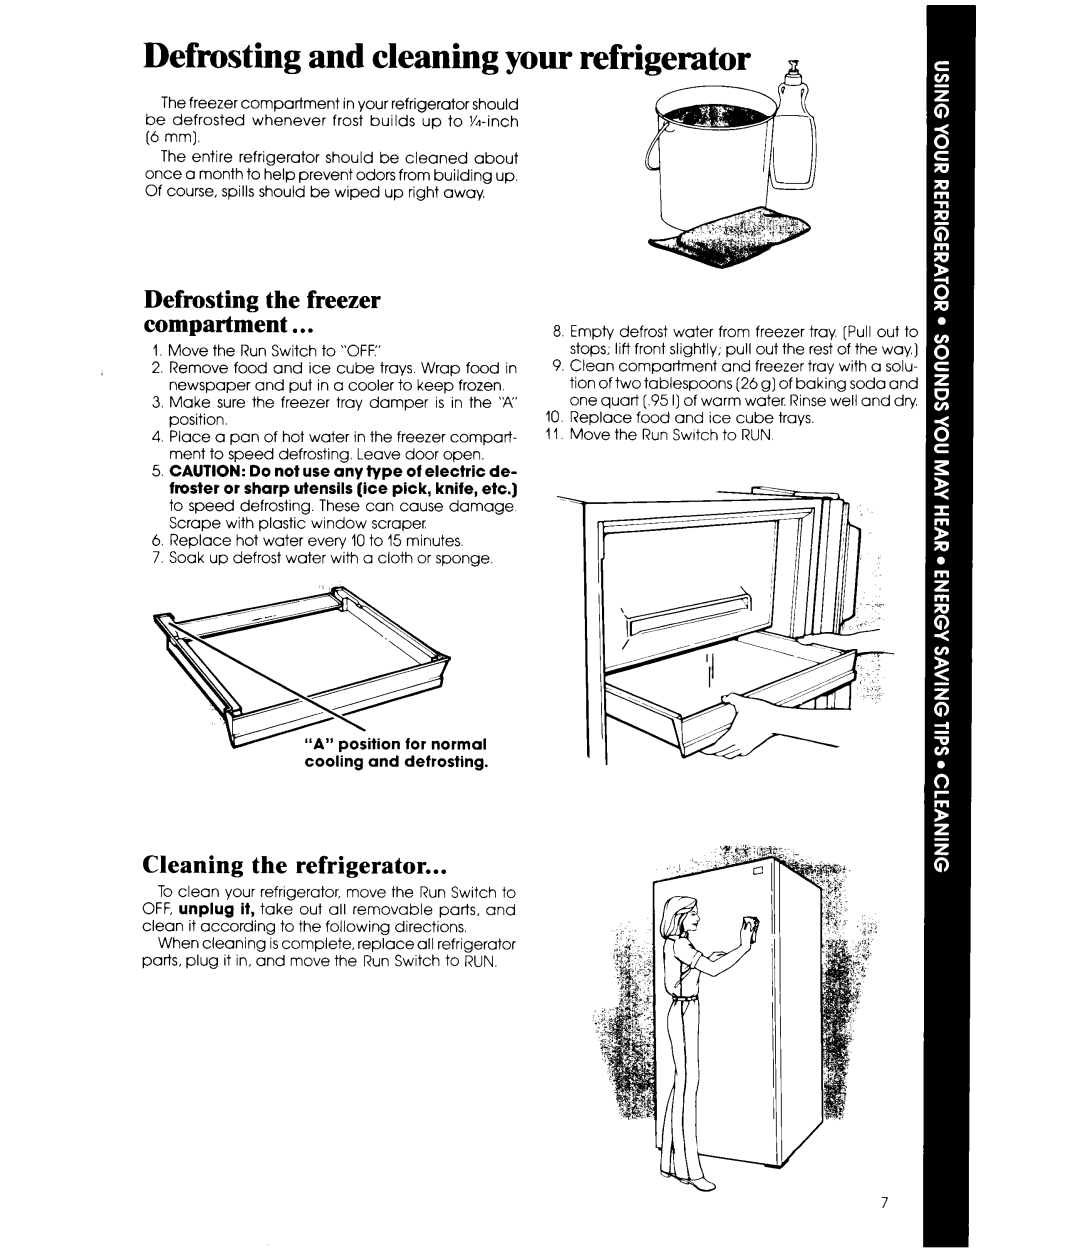 Whirlpool ELl5CCXR manual Defrosting and cleaning your refrigerator, Cleaning the refrigerator 